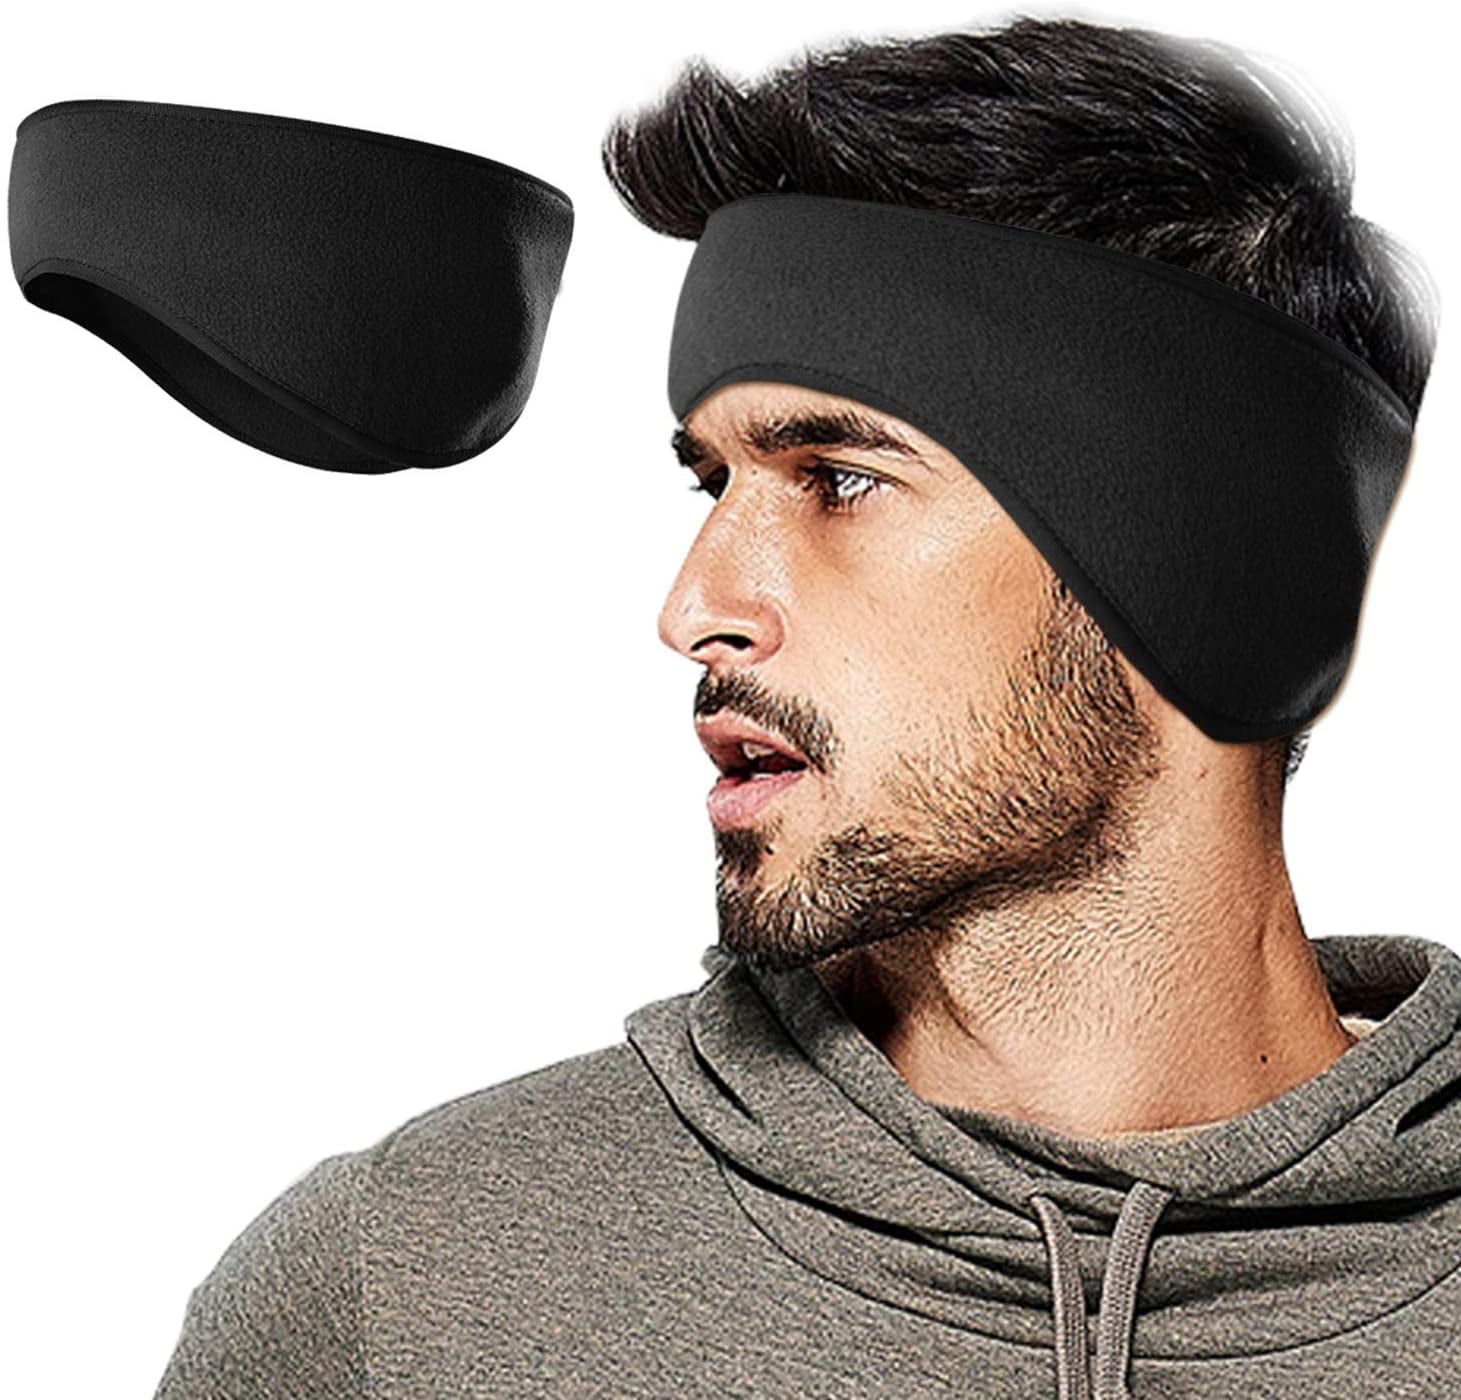 Double Layer Cold Weather Poly Headband Ear Warmer ECWCS Rothco 